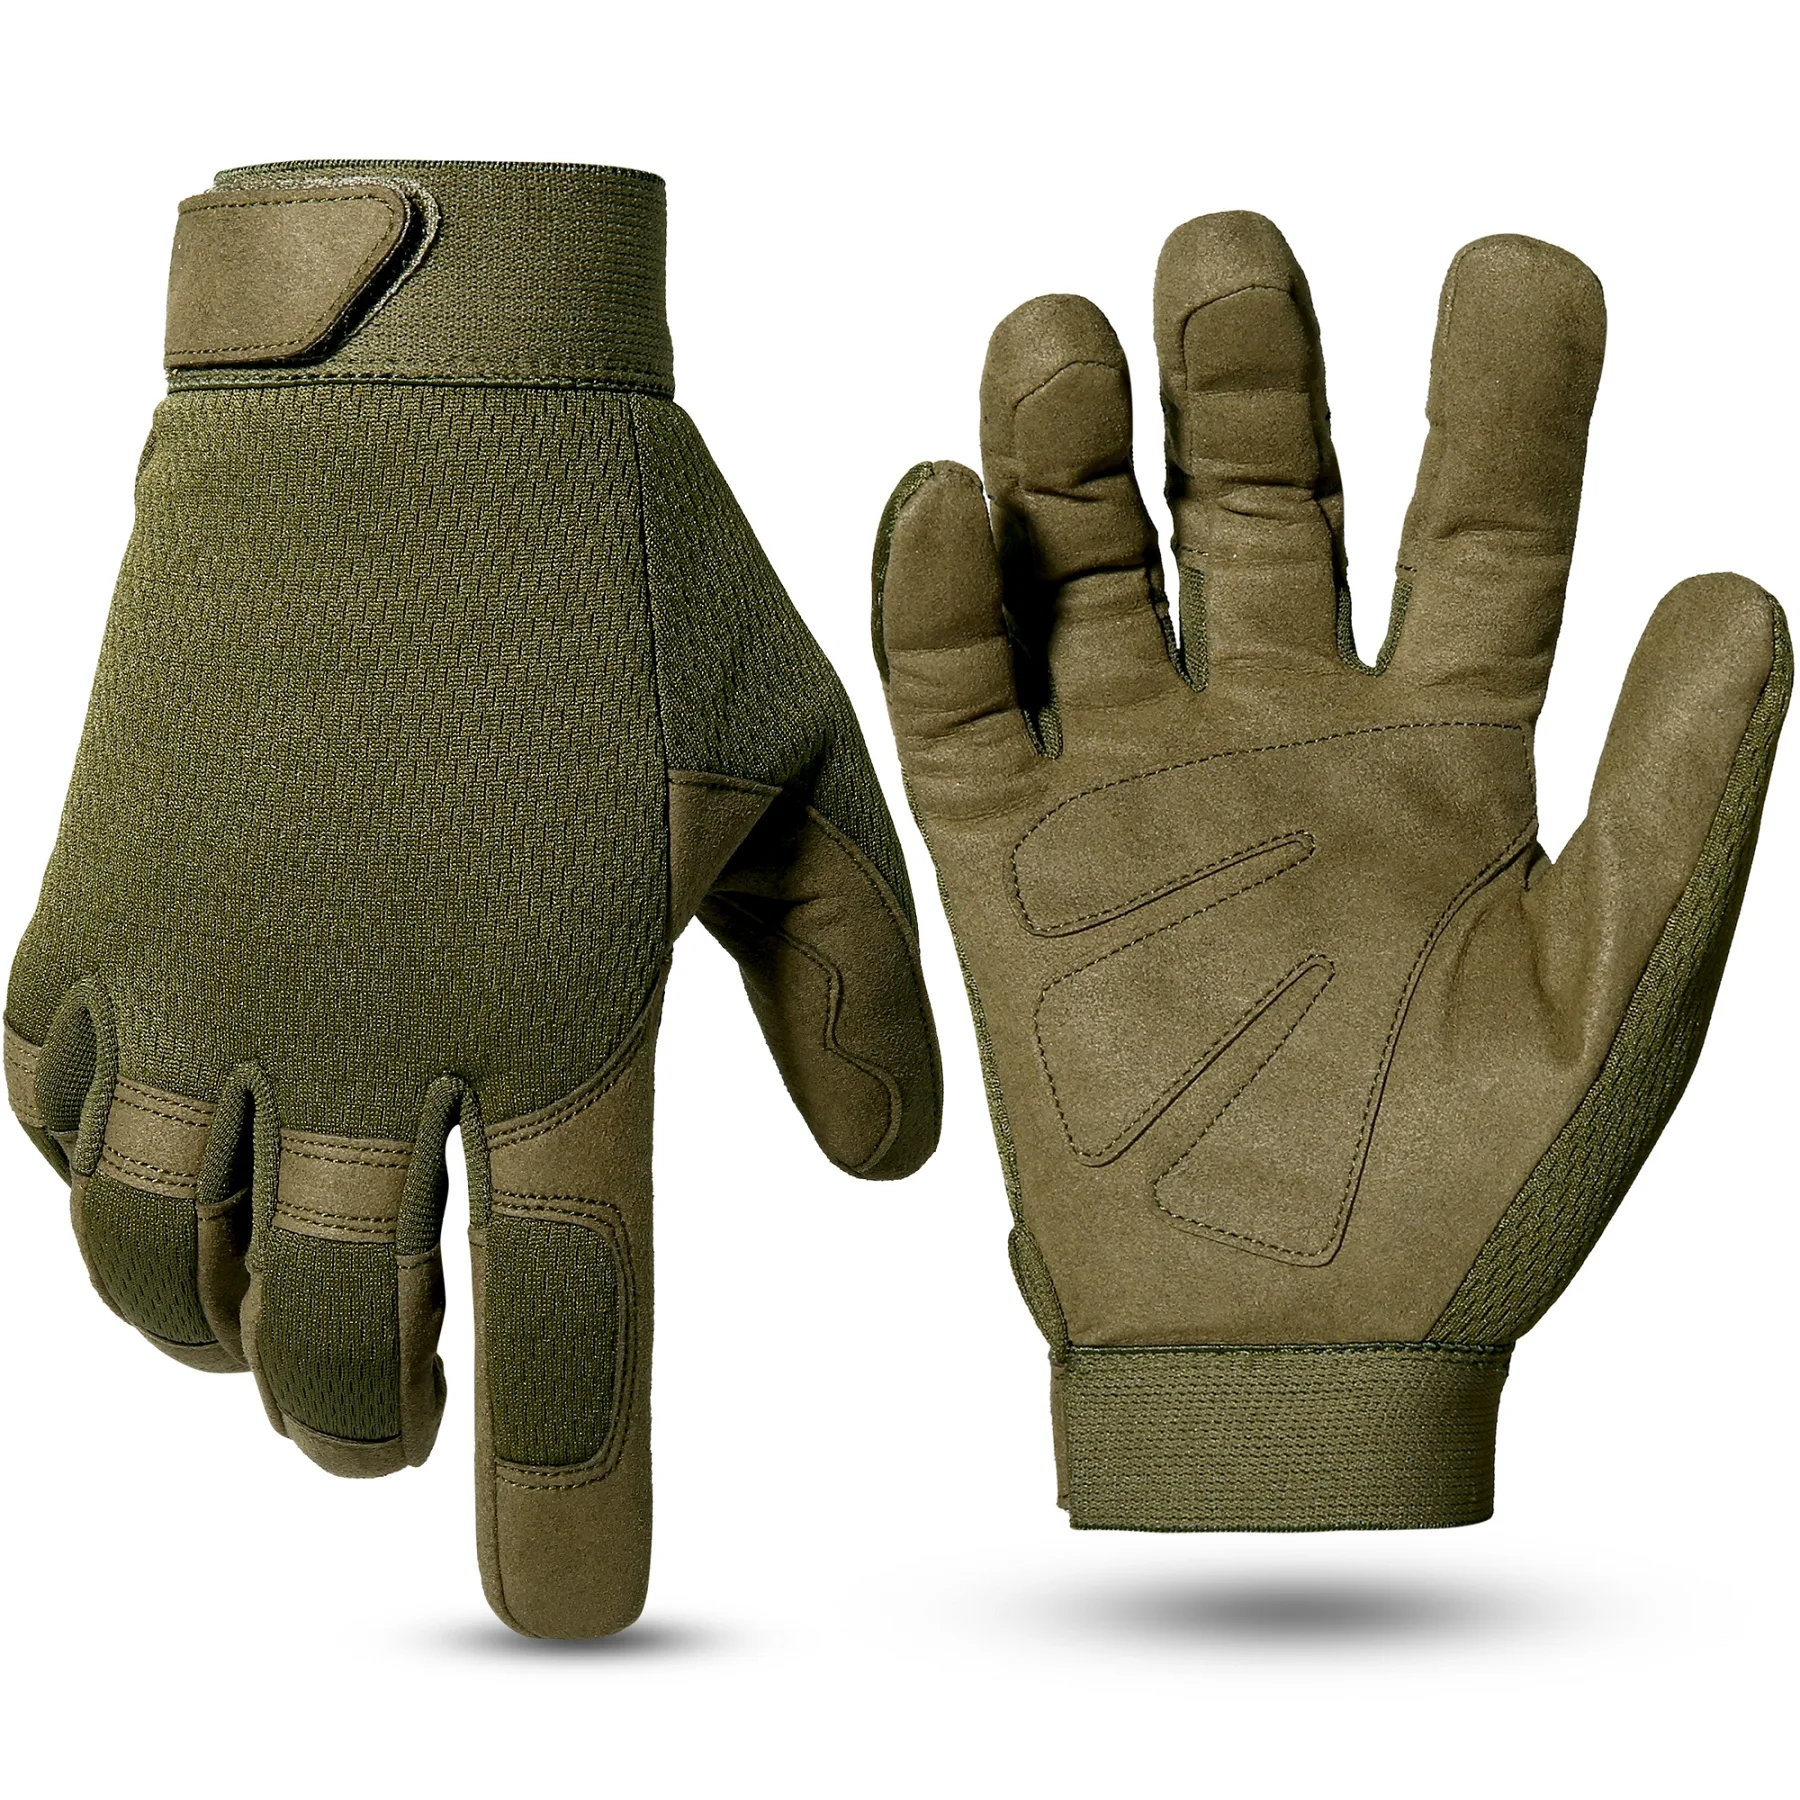 Details about   Multicam Tactical Glove Camo Army Military Combat Airsoft Bicycle Outdoor Hiking 